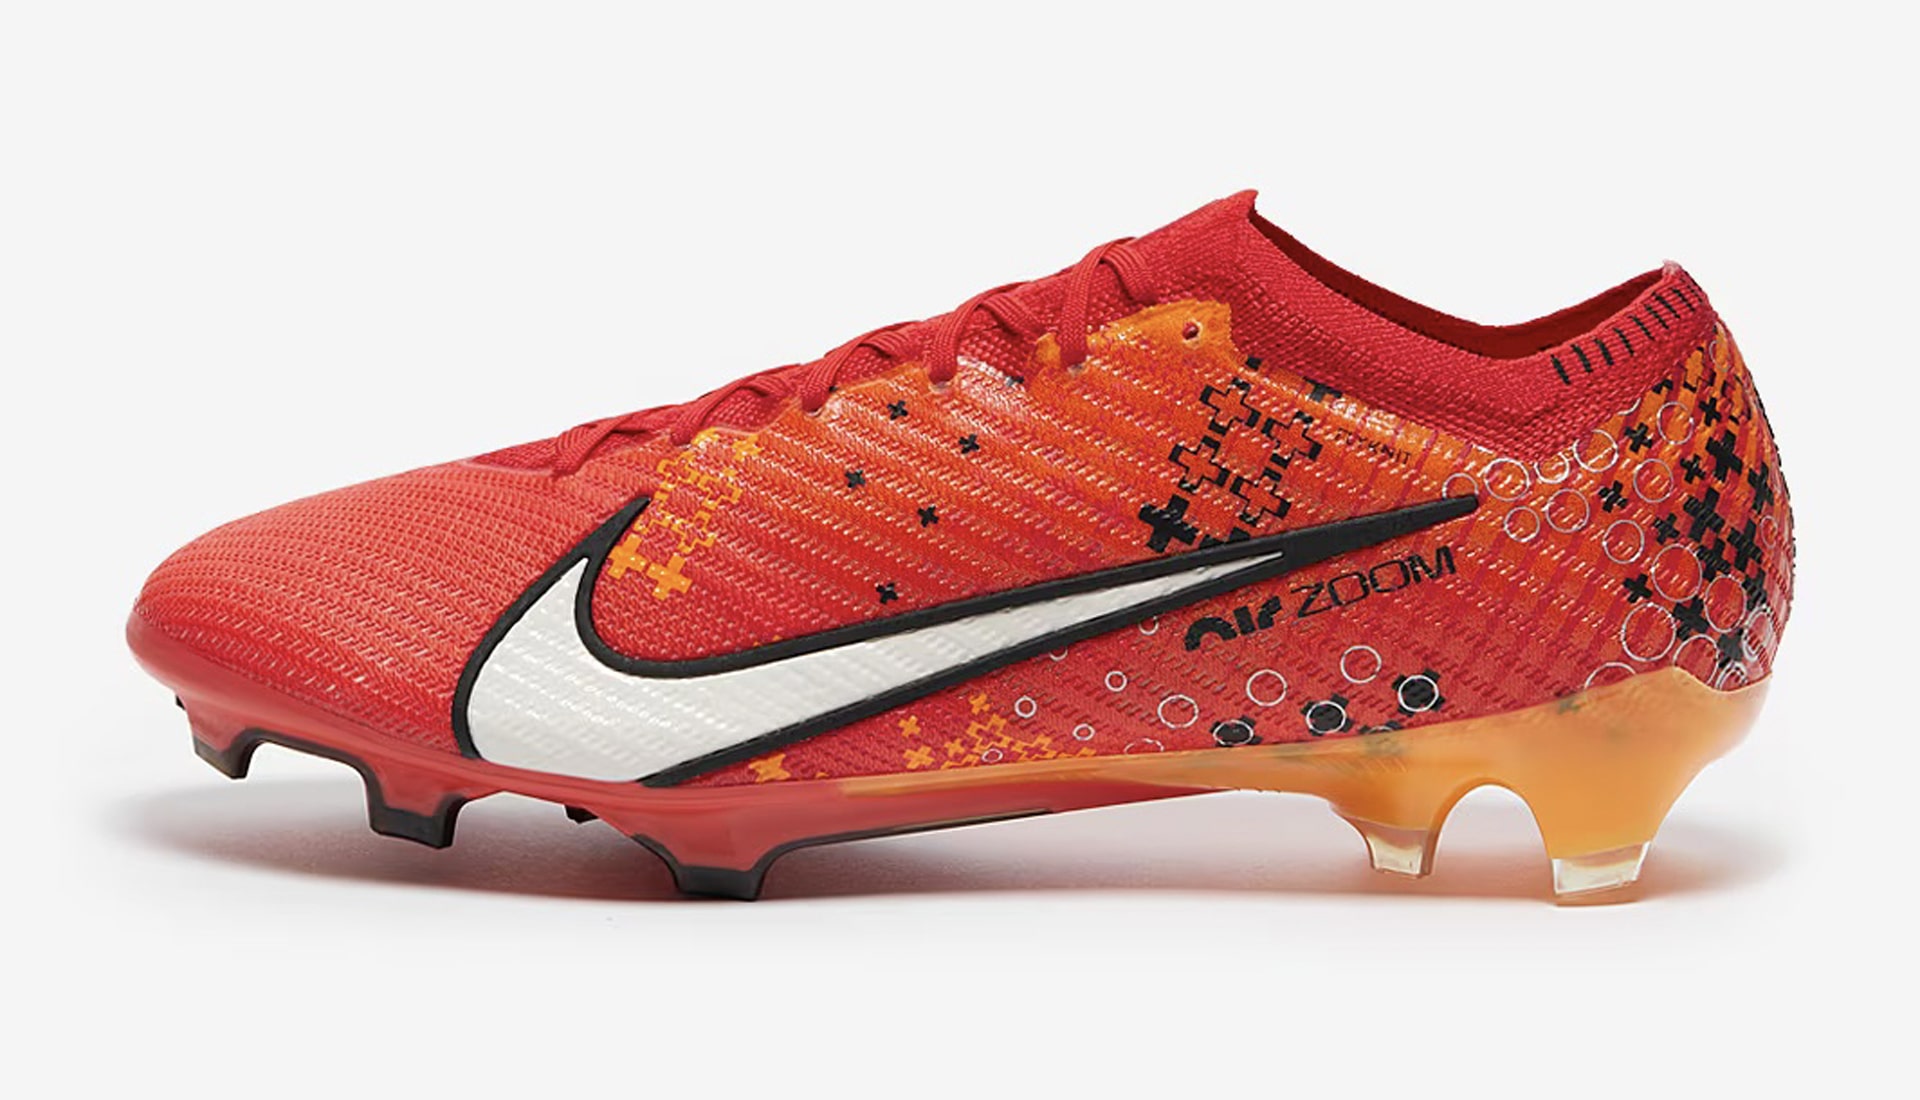 The 8 most comfortable football boots 2023